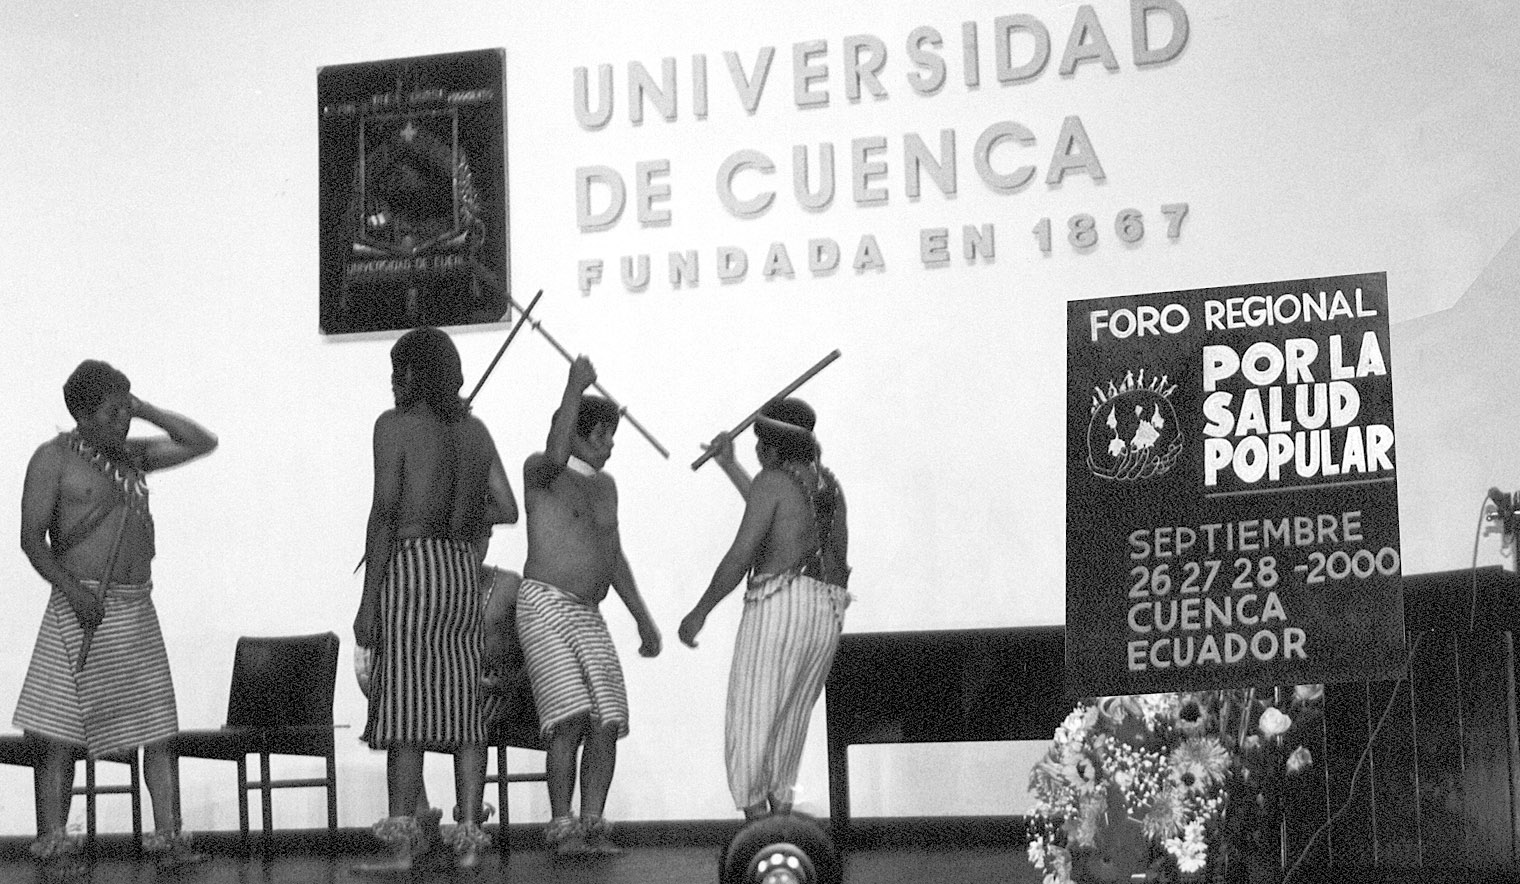 The Cuenca Forum for Health of the People opened with a presentation by shamans (medicine men) from the Shaur tribe in jungles of Eastern Ecuador. The shamans insisted that to heal the people’s physical ills, it is necessary first to heal their spiritual ills and to restore a healthy balance with the natural environment.